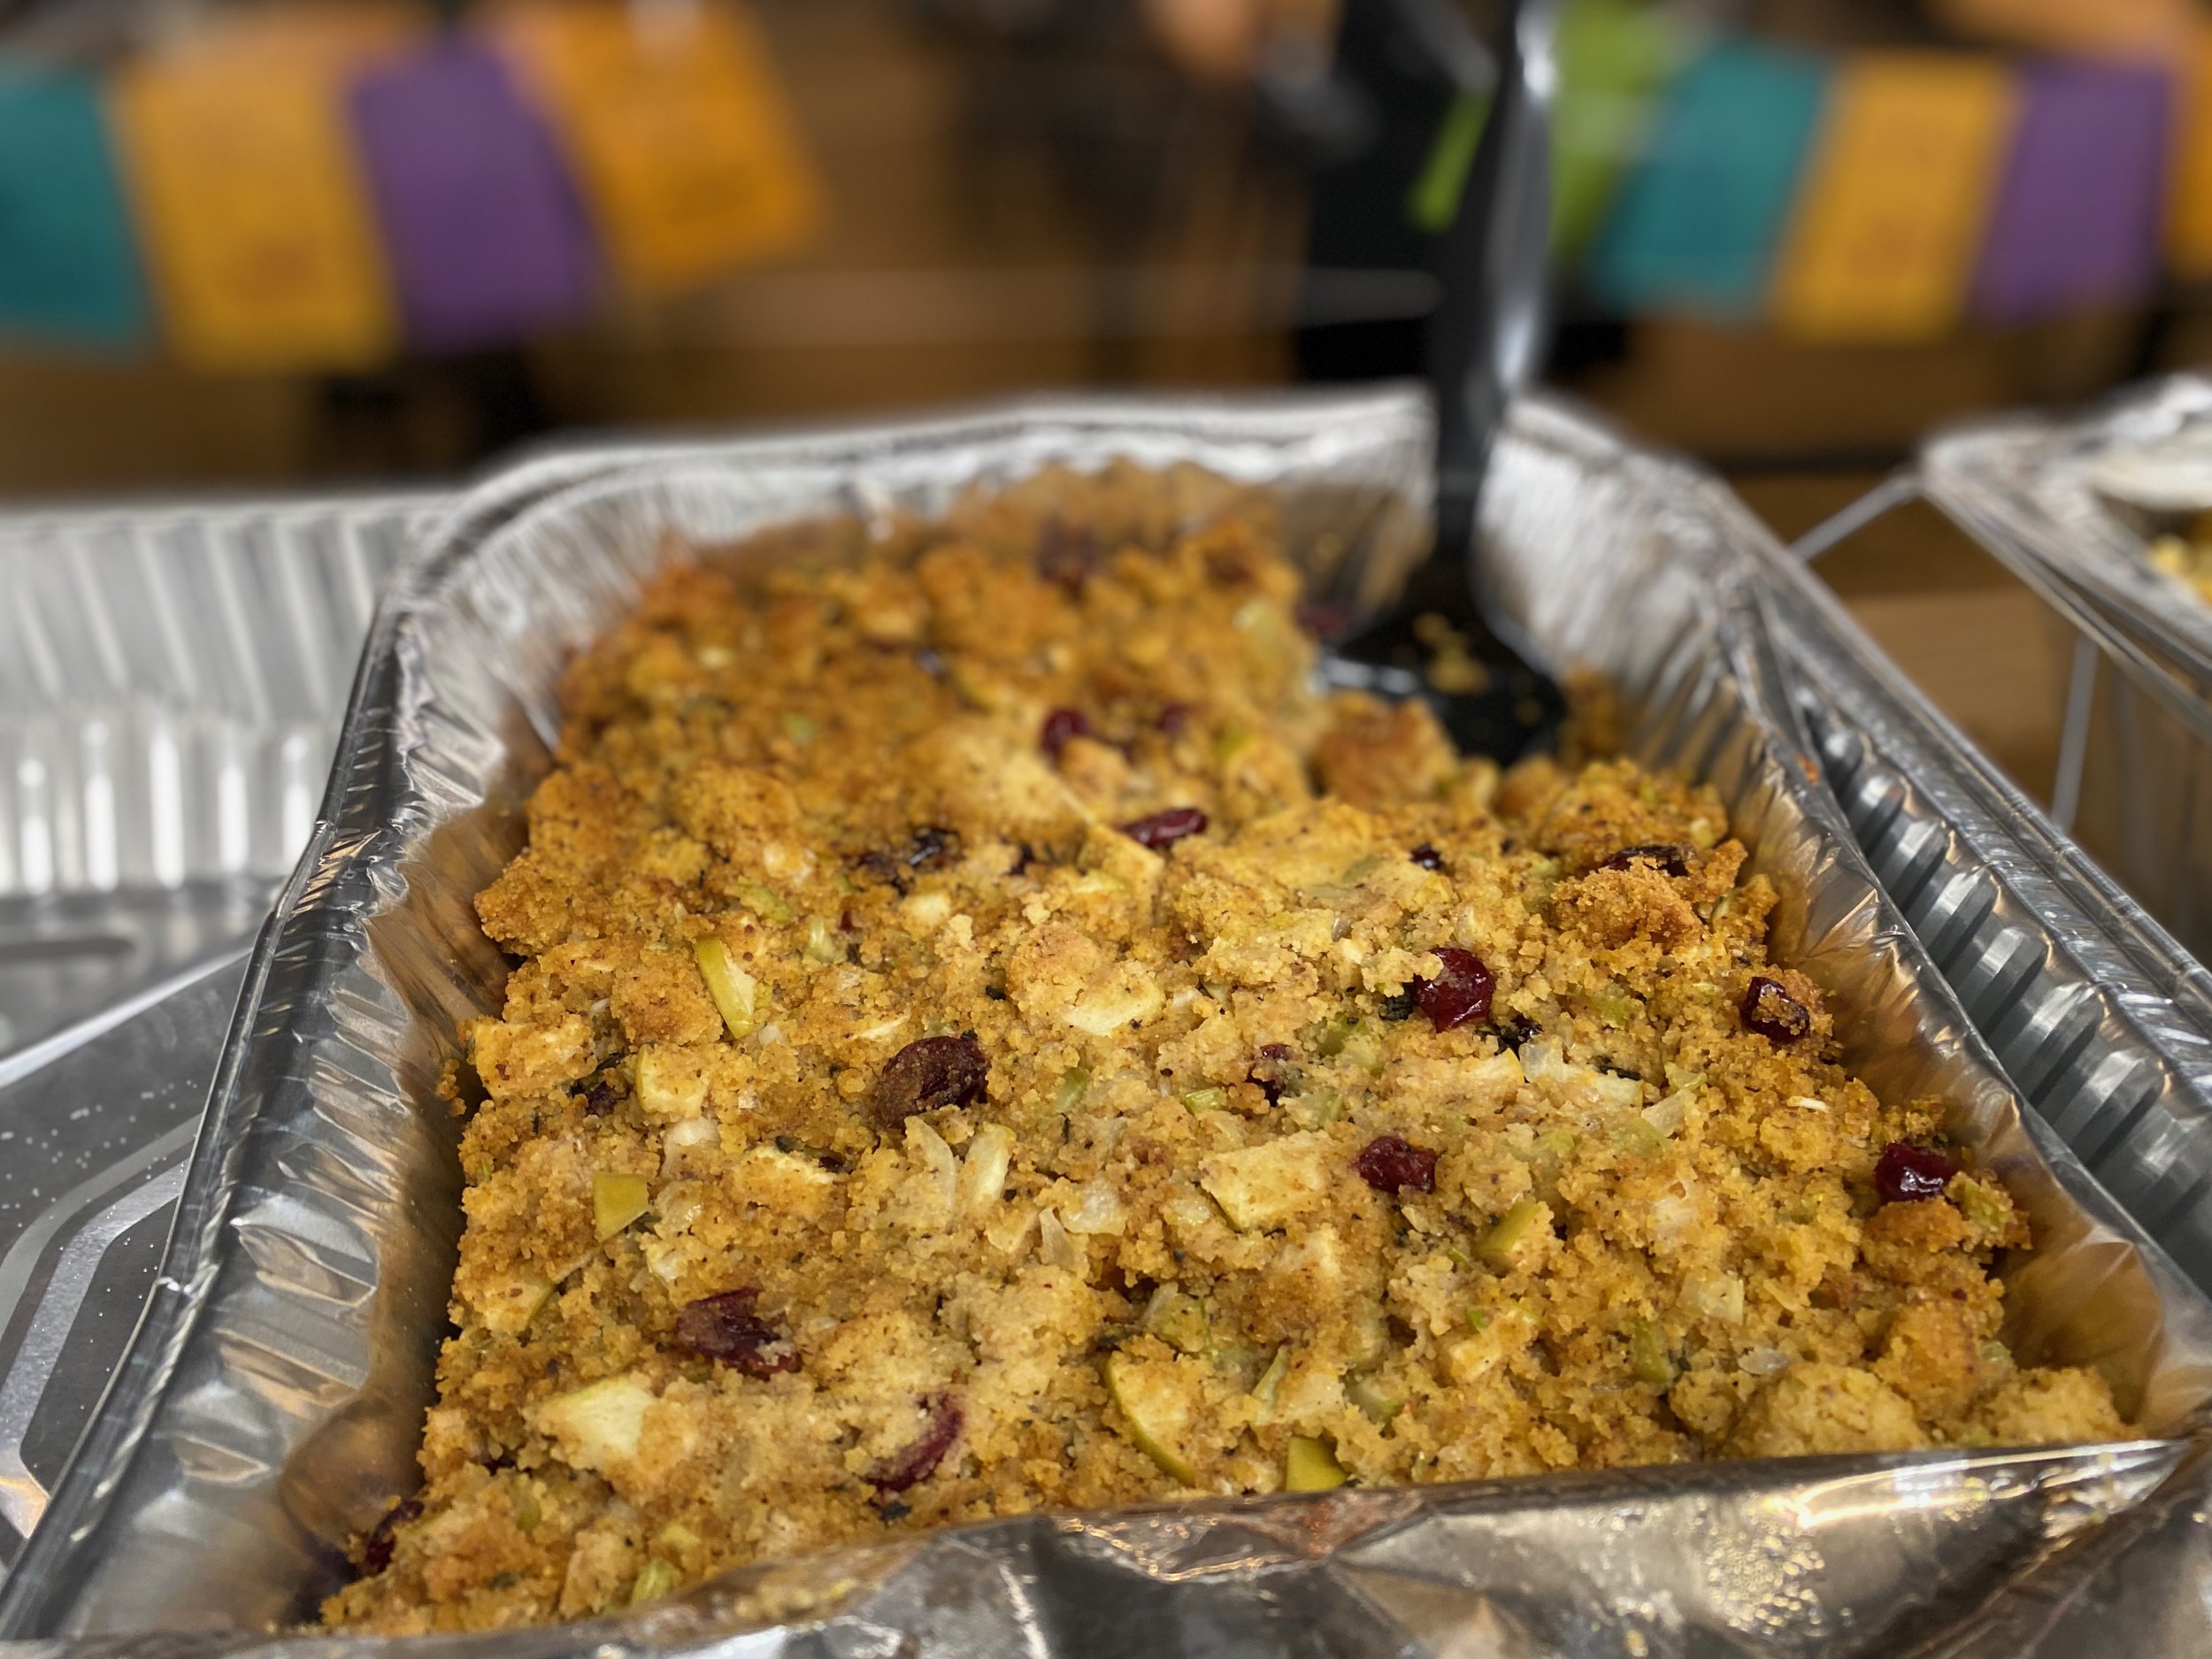 Powered By Plants Consultings Cornbread and Cranberry Stuffing